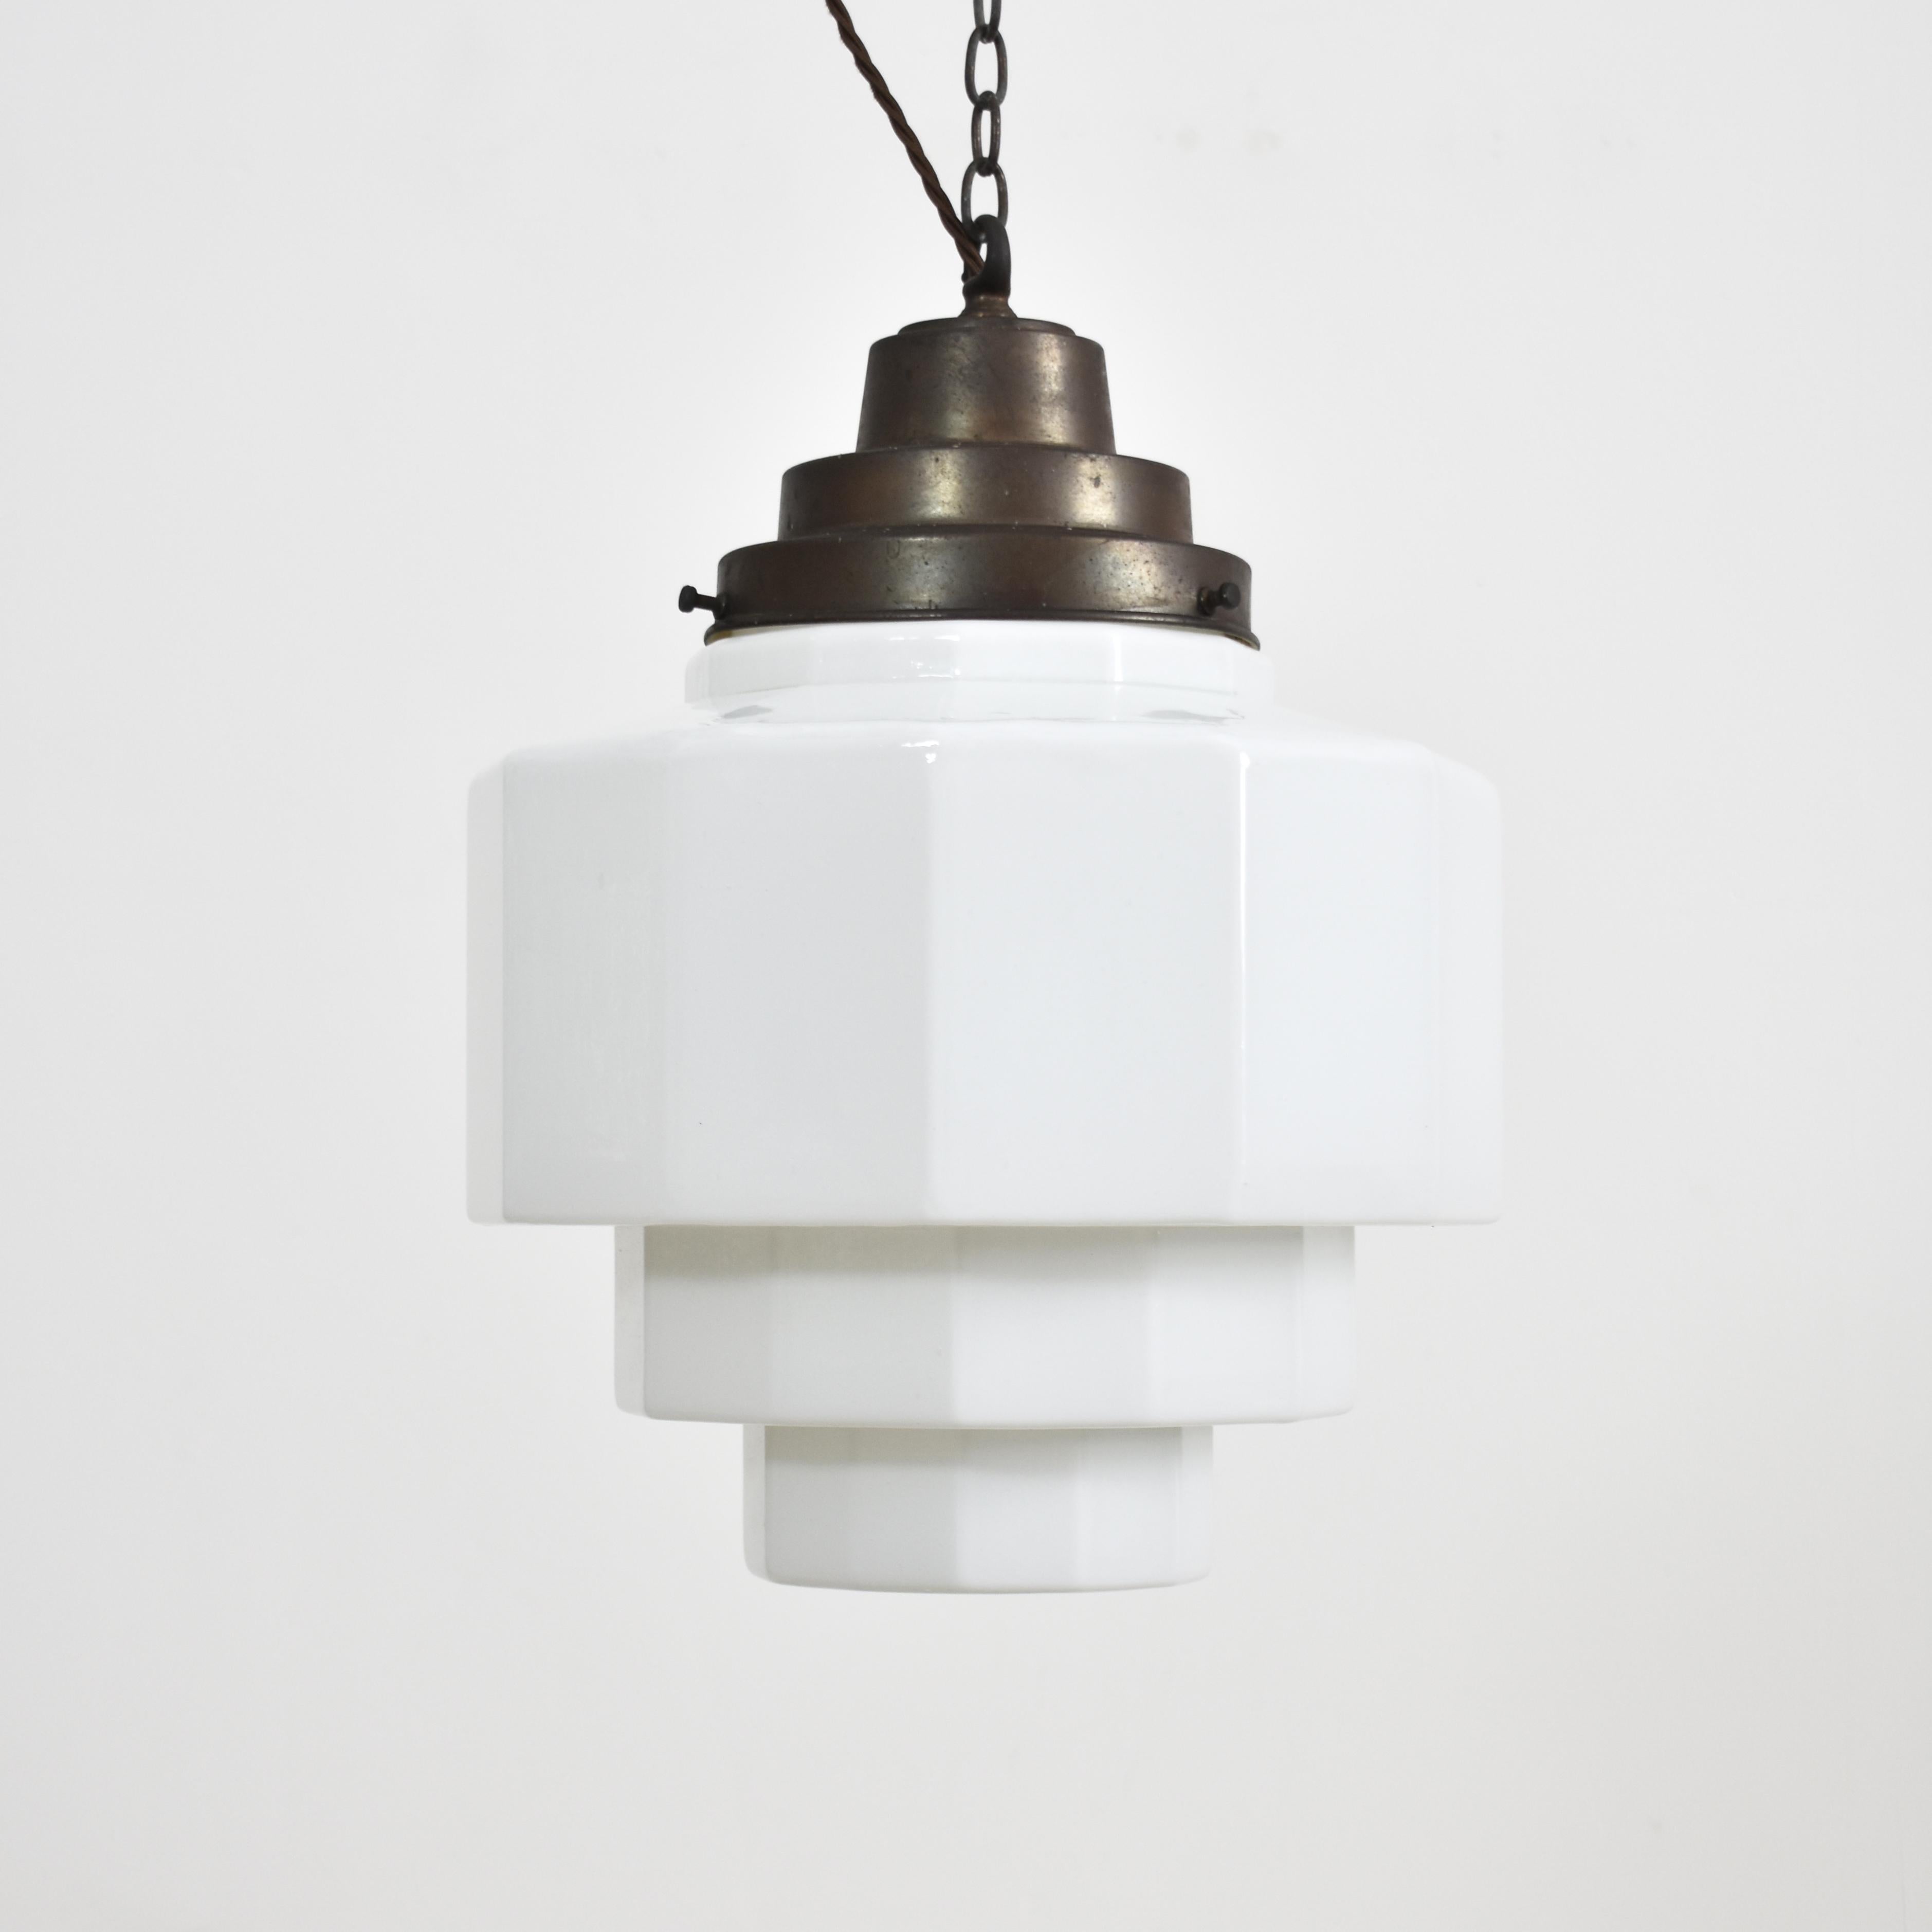 Antique Church Opaline Pendant Light -AD

An original large opaline glass pendant light. The light has a milk glass opaline shade and original pressed brass hanging gallery. The gallery finish has been left untouched in it original condition. The